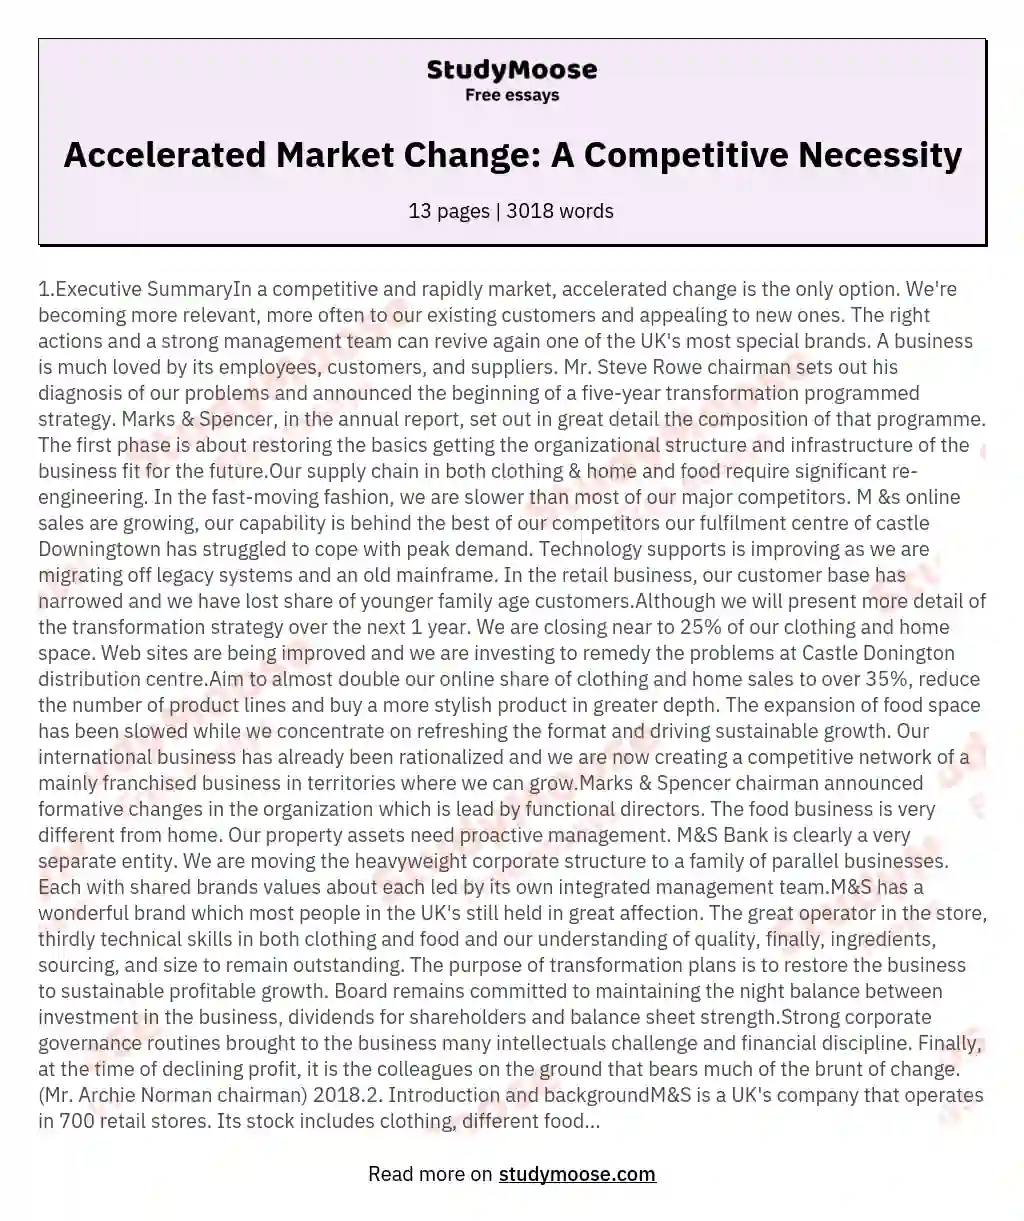 Accelerated Market Change: A Competitive Necessity essay